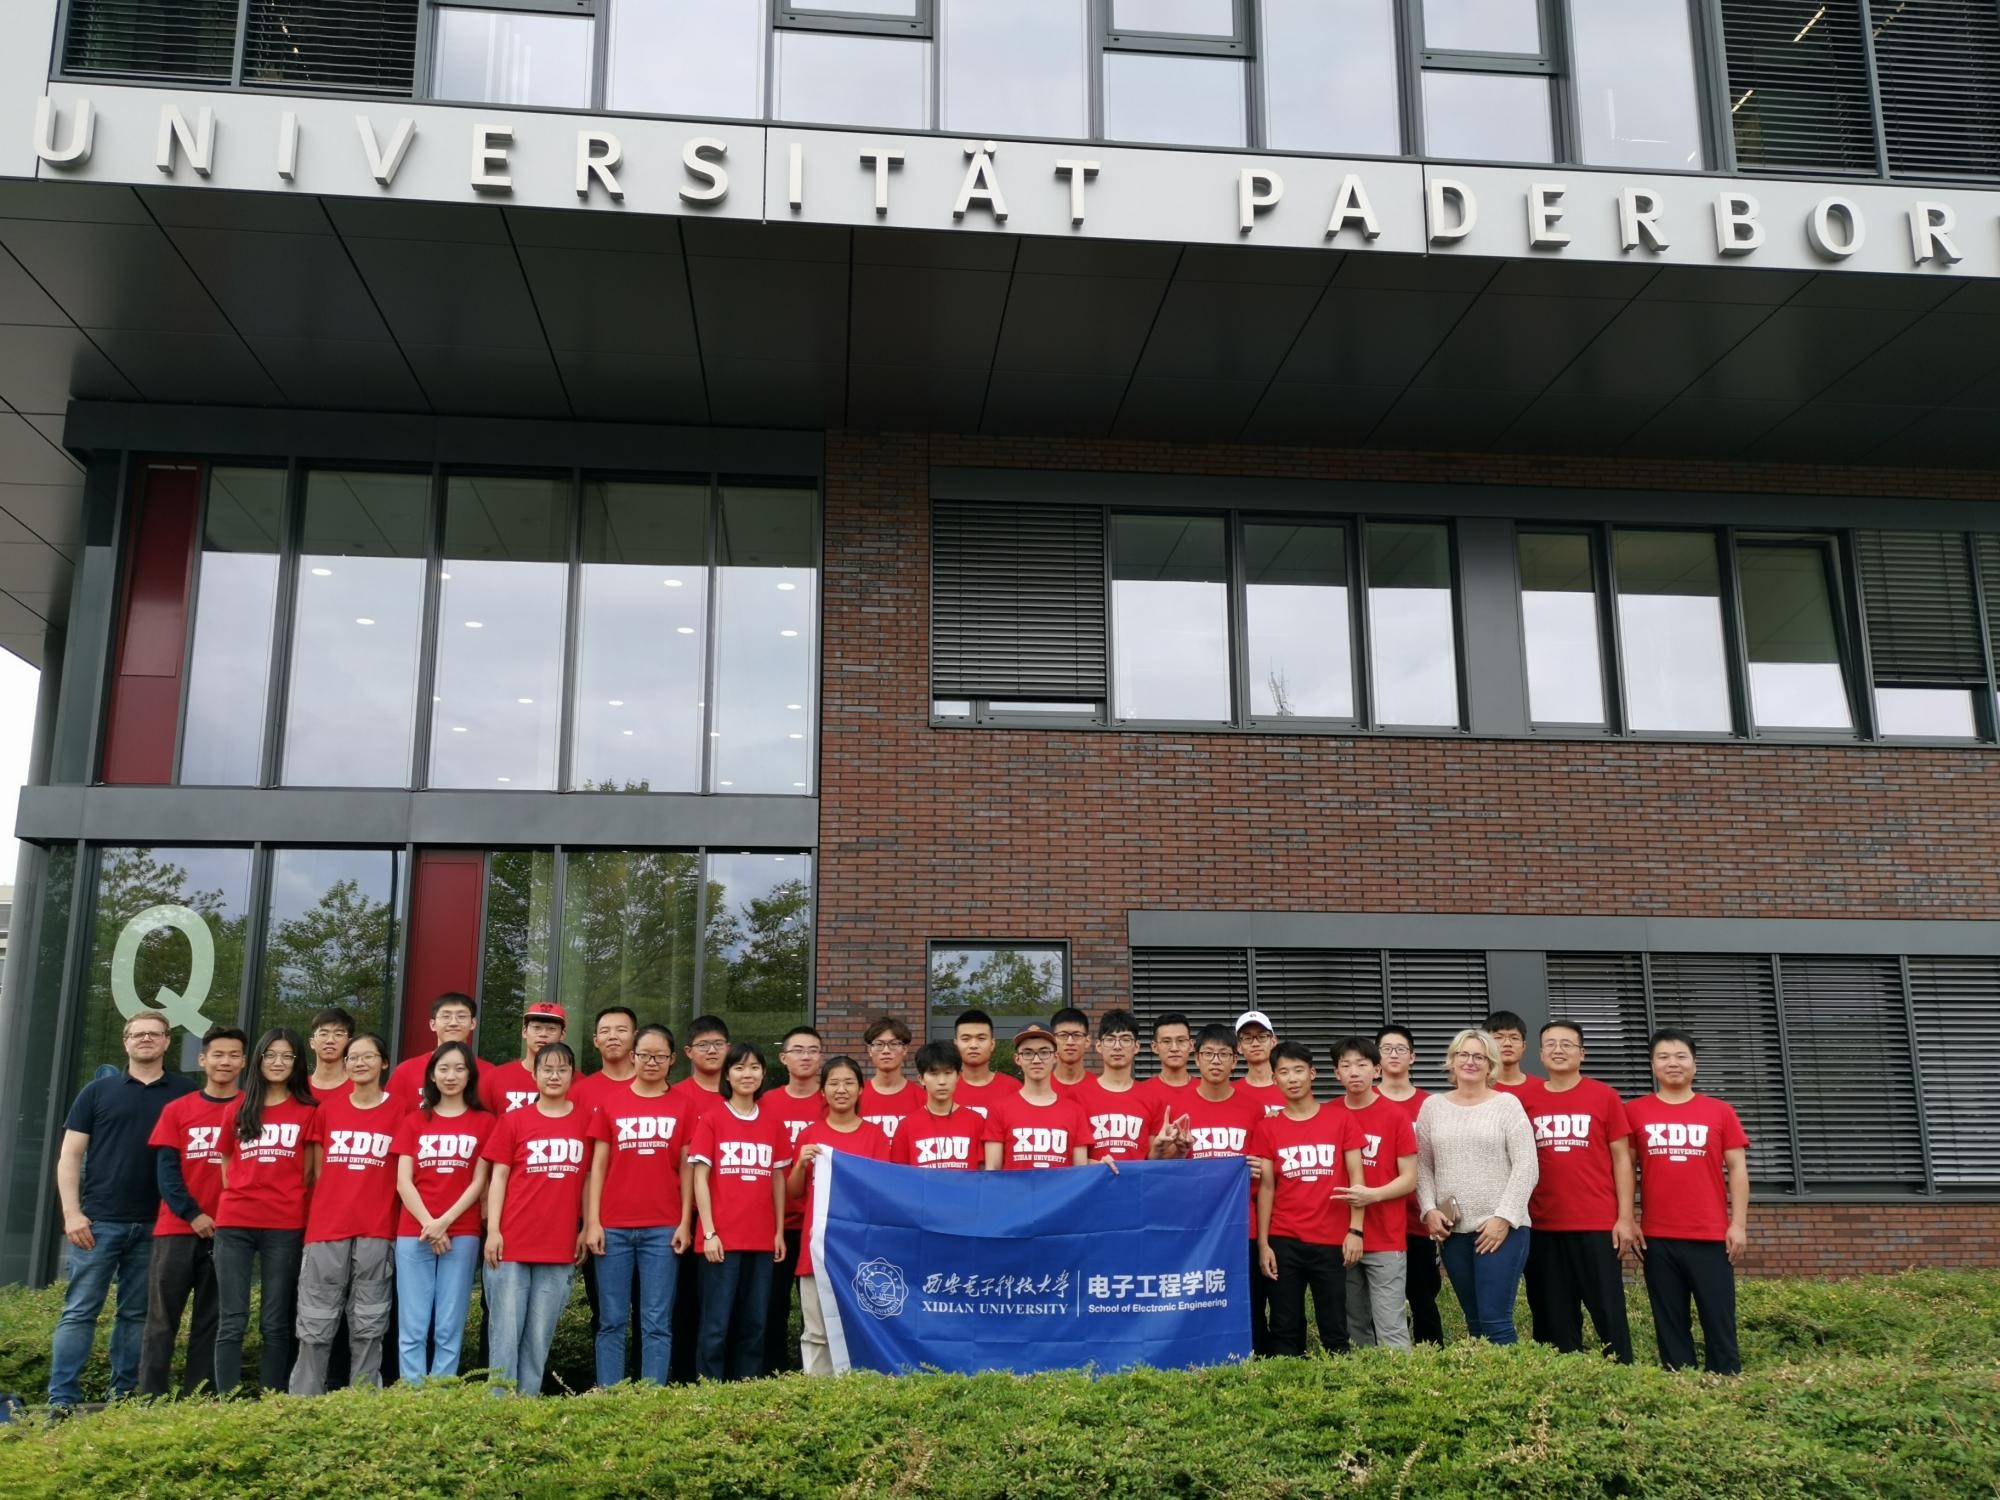 Comprehensive Study---A Report of Communication and Exchange of the Students of the School of Electronic Engineering in the University of Paderborn